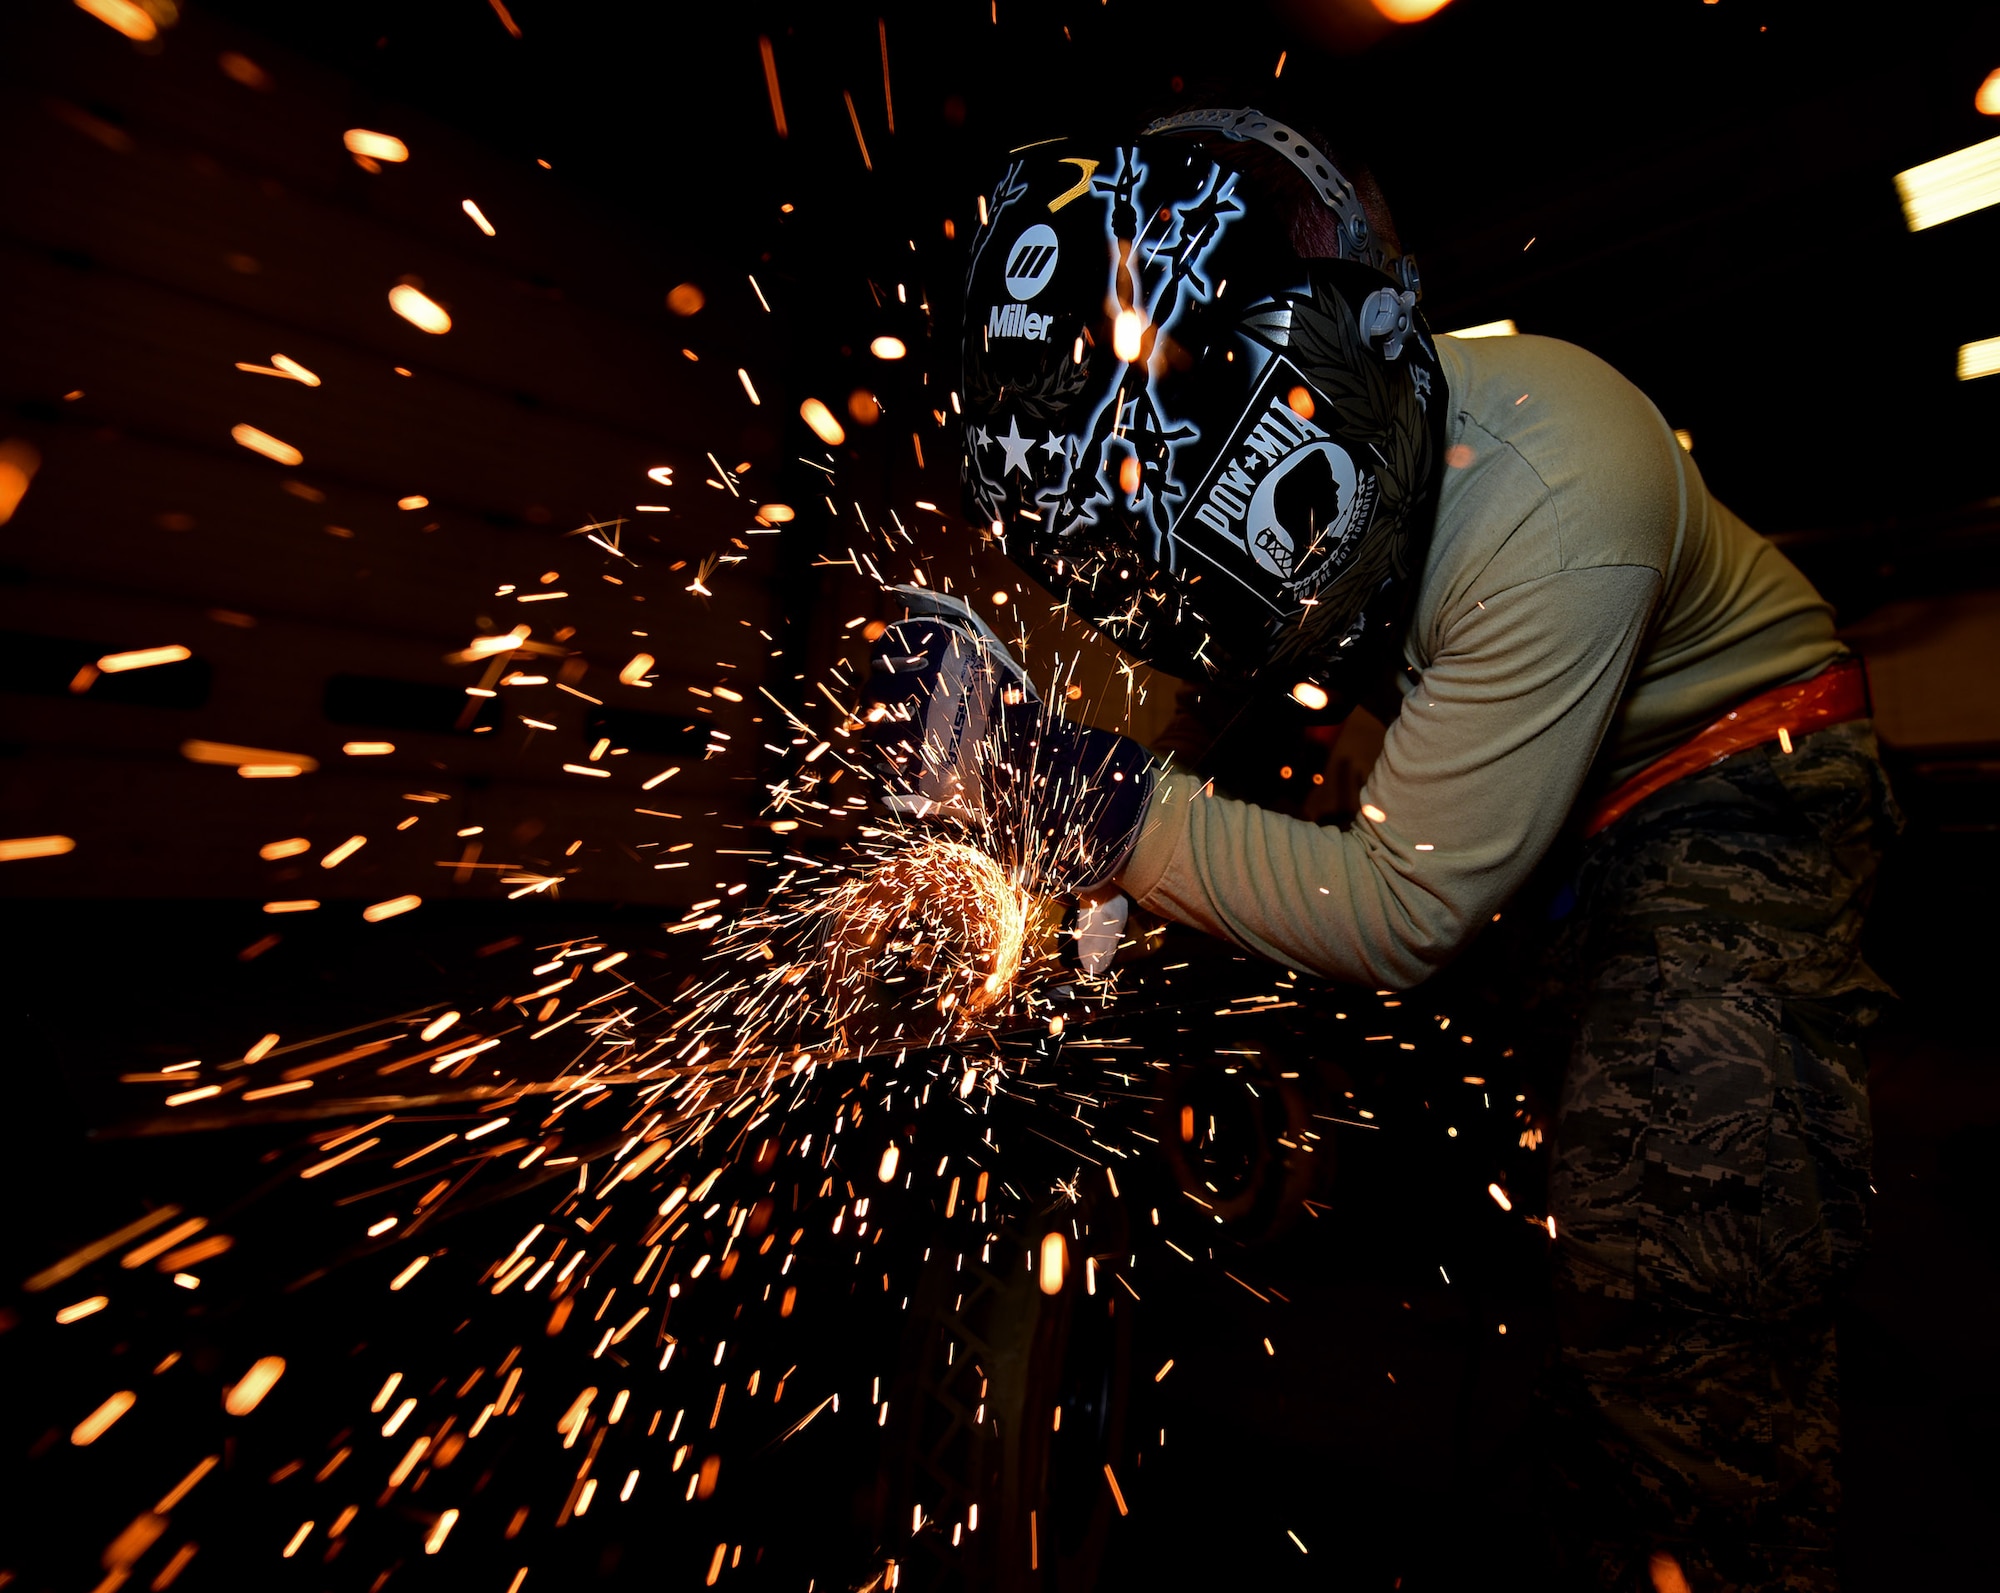 Senior Airman Kyle Eberhart, an aircraft metals technology journeyman assigned to the 28th  Maintenance Squadron, uses a grinder to cut a piece of metal to size for a trailer bed at Ellsworth Air Force Base, S.D., Oct. 27, 2016.  The trailer is one of many types of munitions support equipment that metals tech Airmen help  repair and create replacement parts for, saving the Air Force millions of dollars each year. (U.S. Air Force photo by Airman 1st Class James L. Miller)